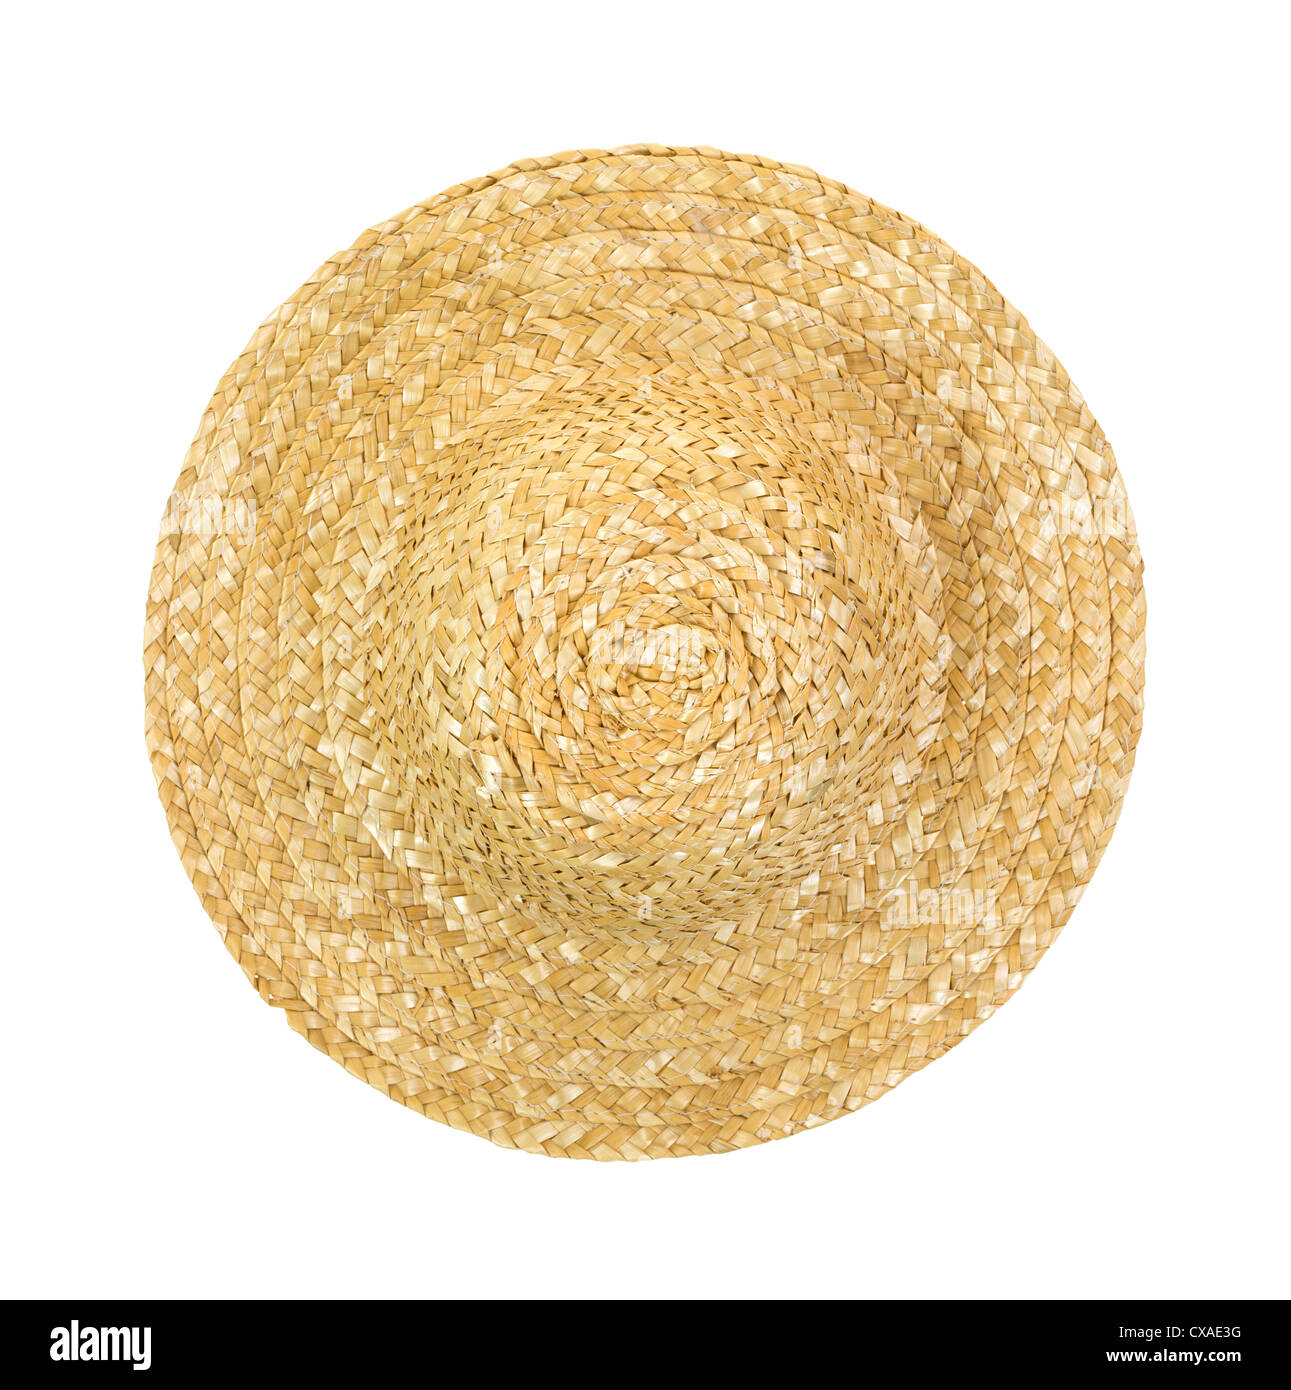 Top view of a round straw hat on a white background. Stock Photo